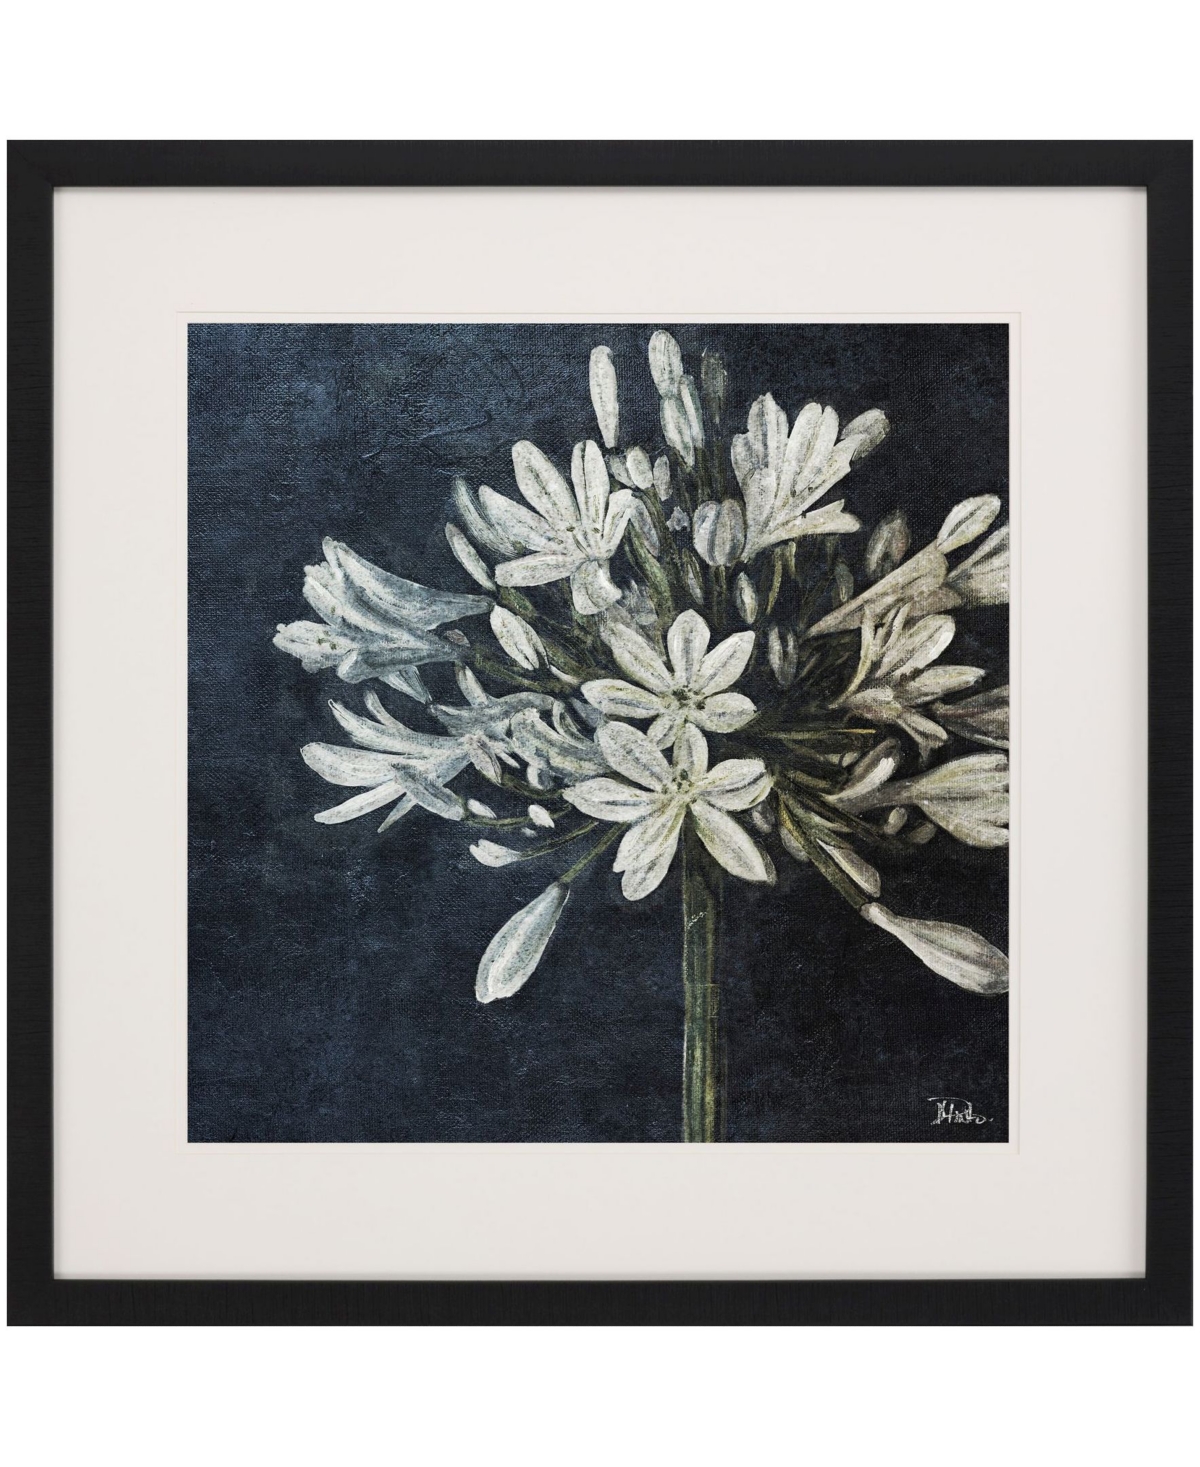 Paragon Picture Gallery Midnight Lilies I Framed Art In Black